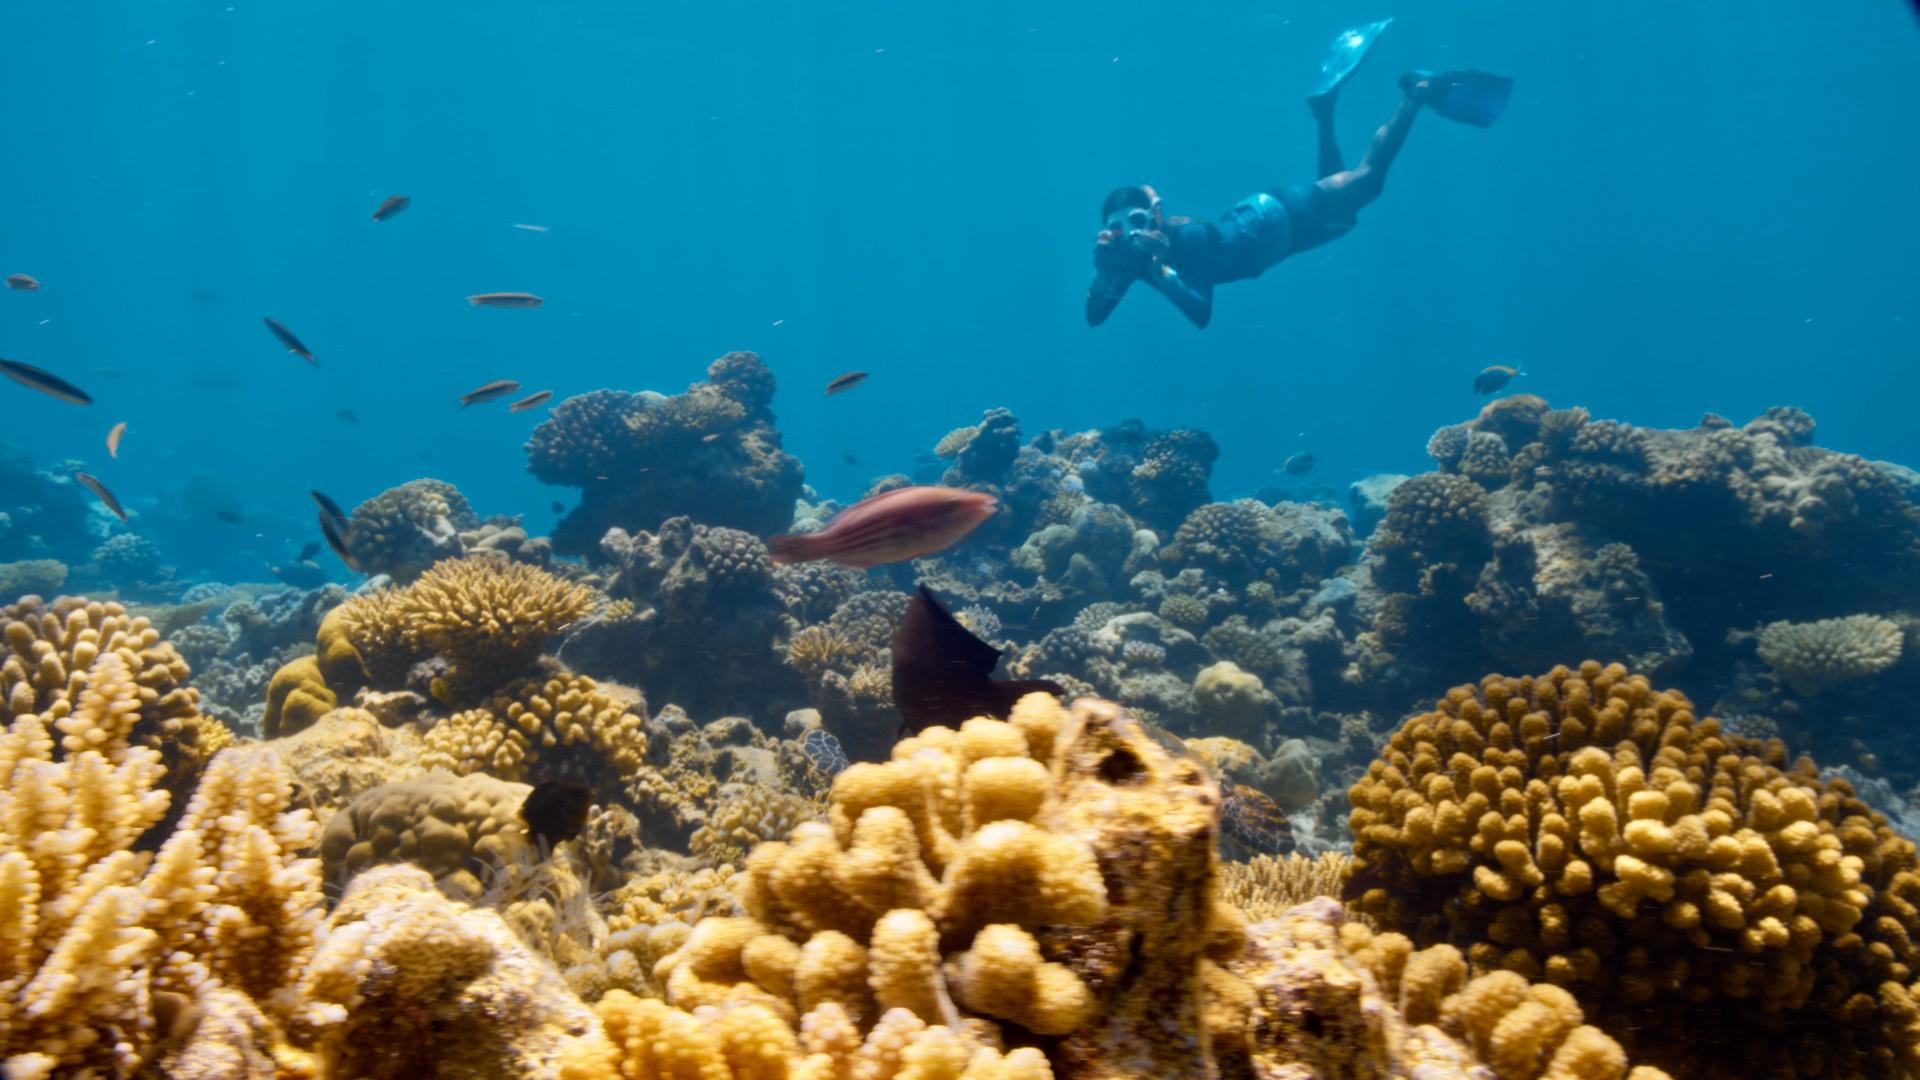 A diver examines coral reefs underwater